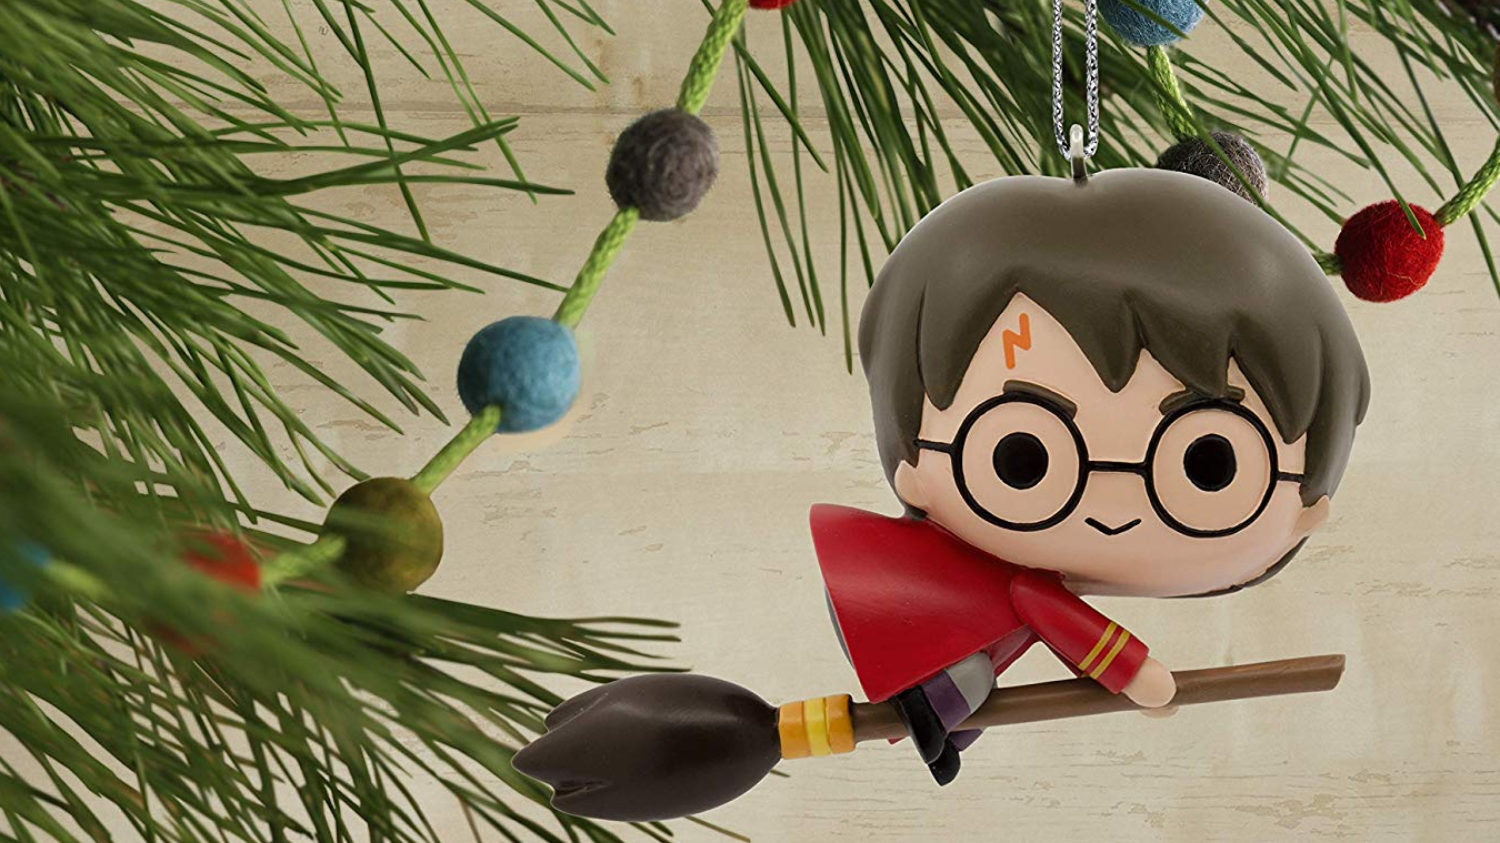 Hallmark Harry Potter Christmas ornaments are a perfect holiday